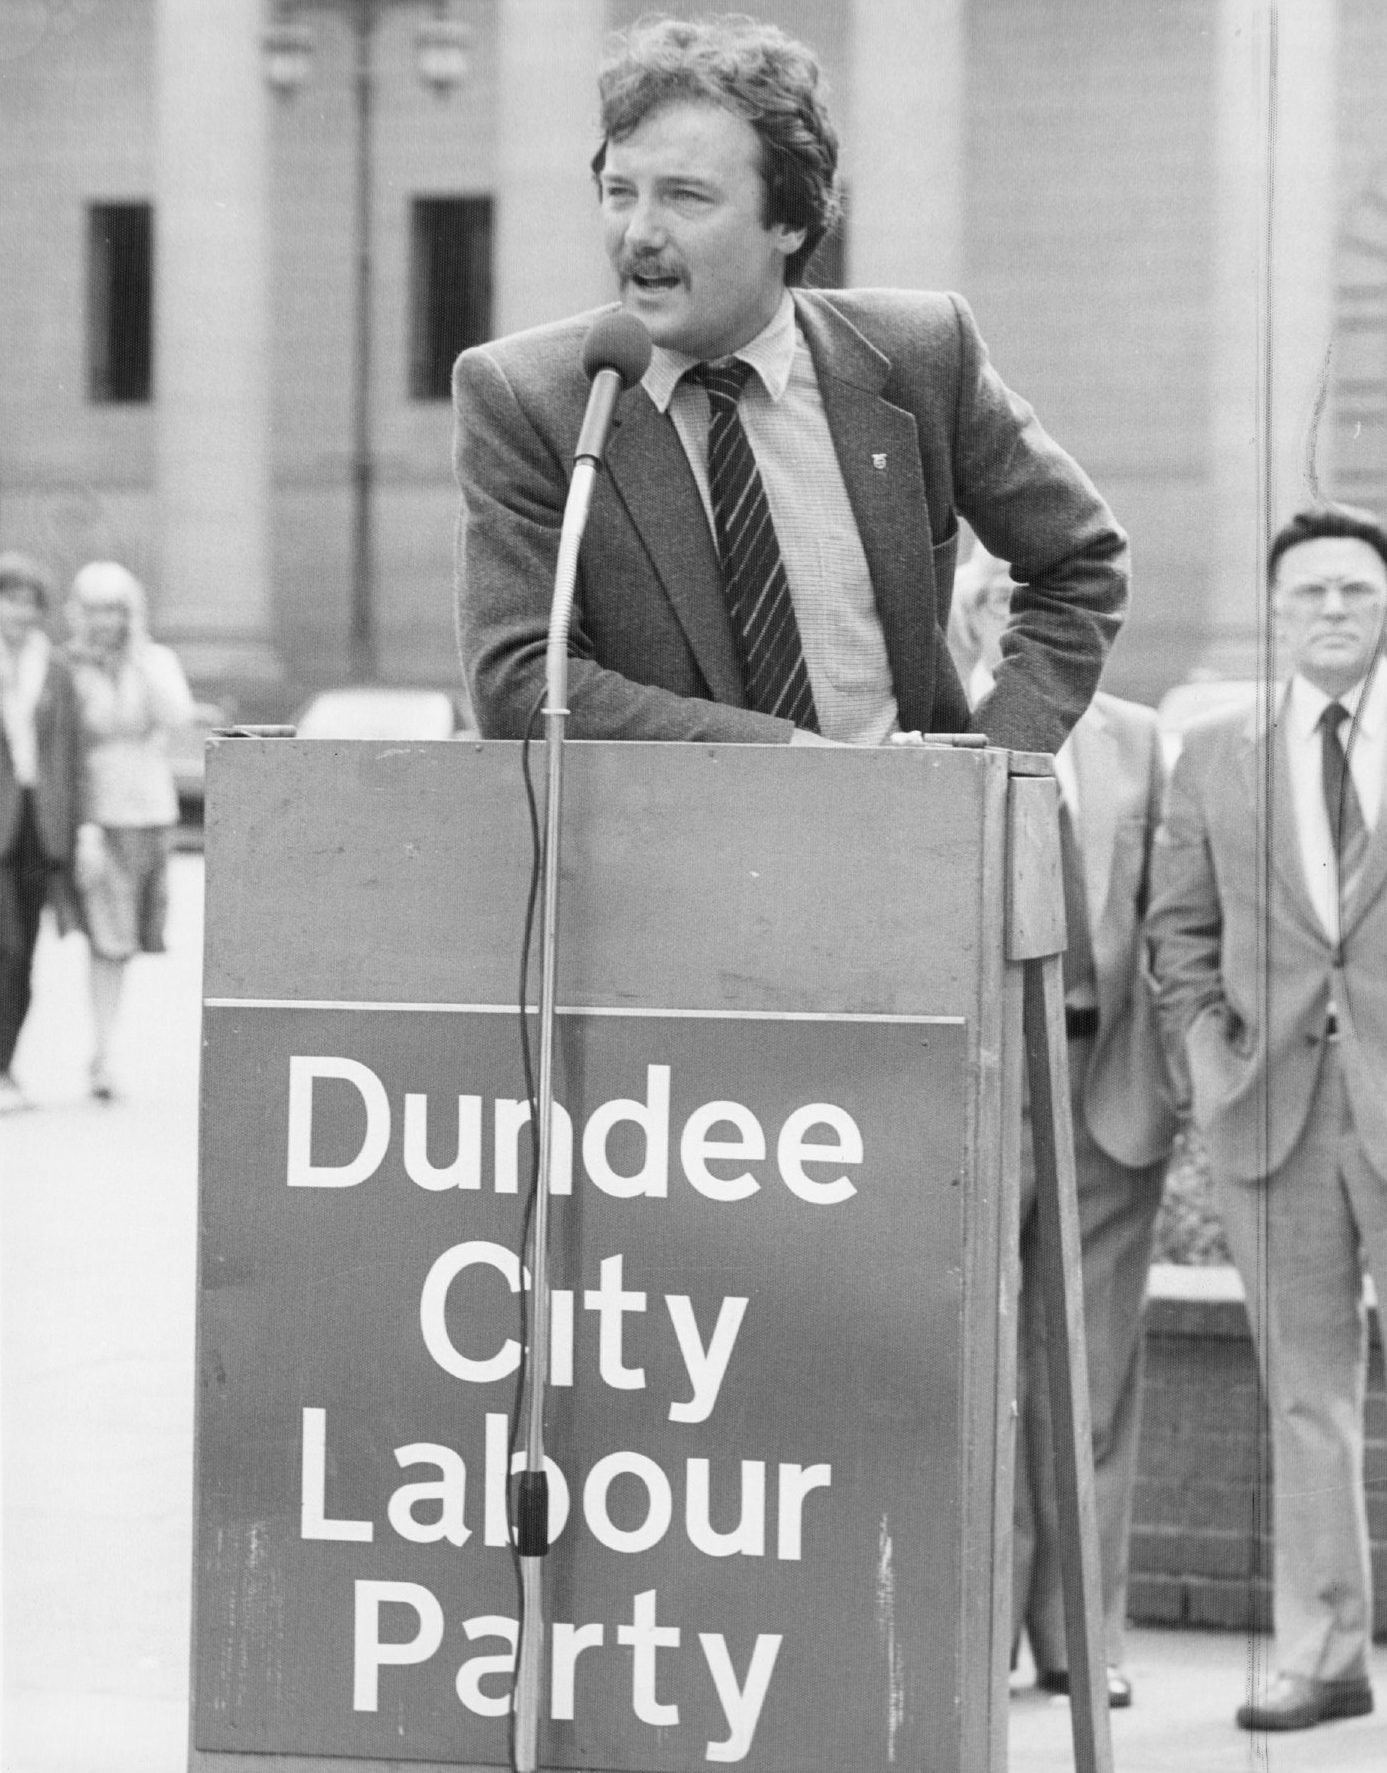 George Galloway at a lectern in Dundee's City Square, promoting the twinning with Nablus.